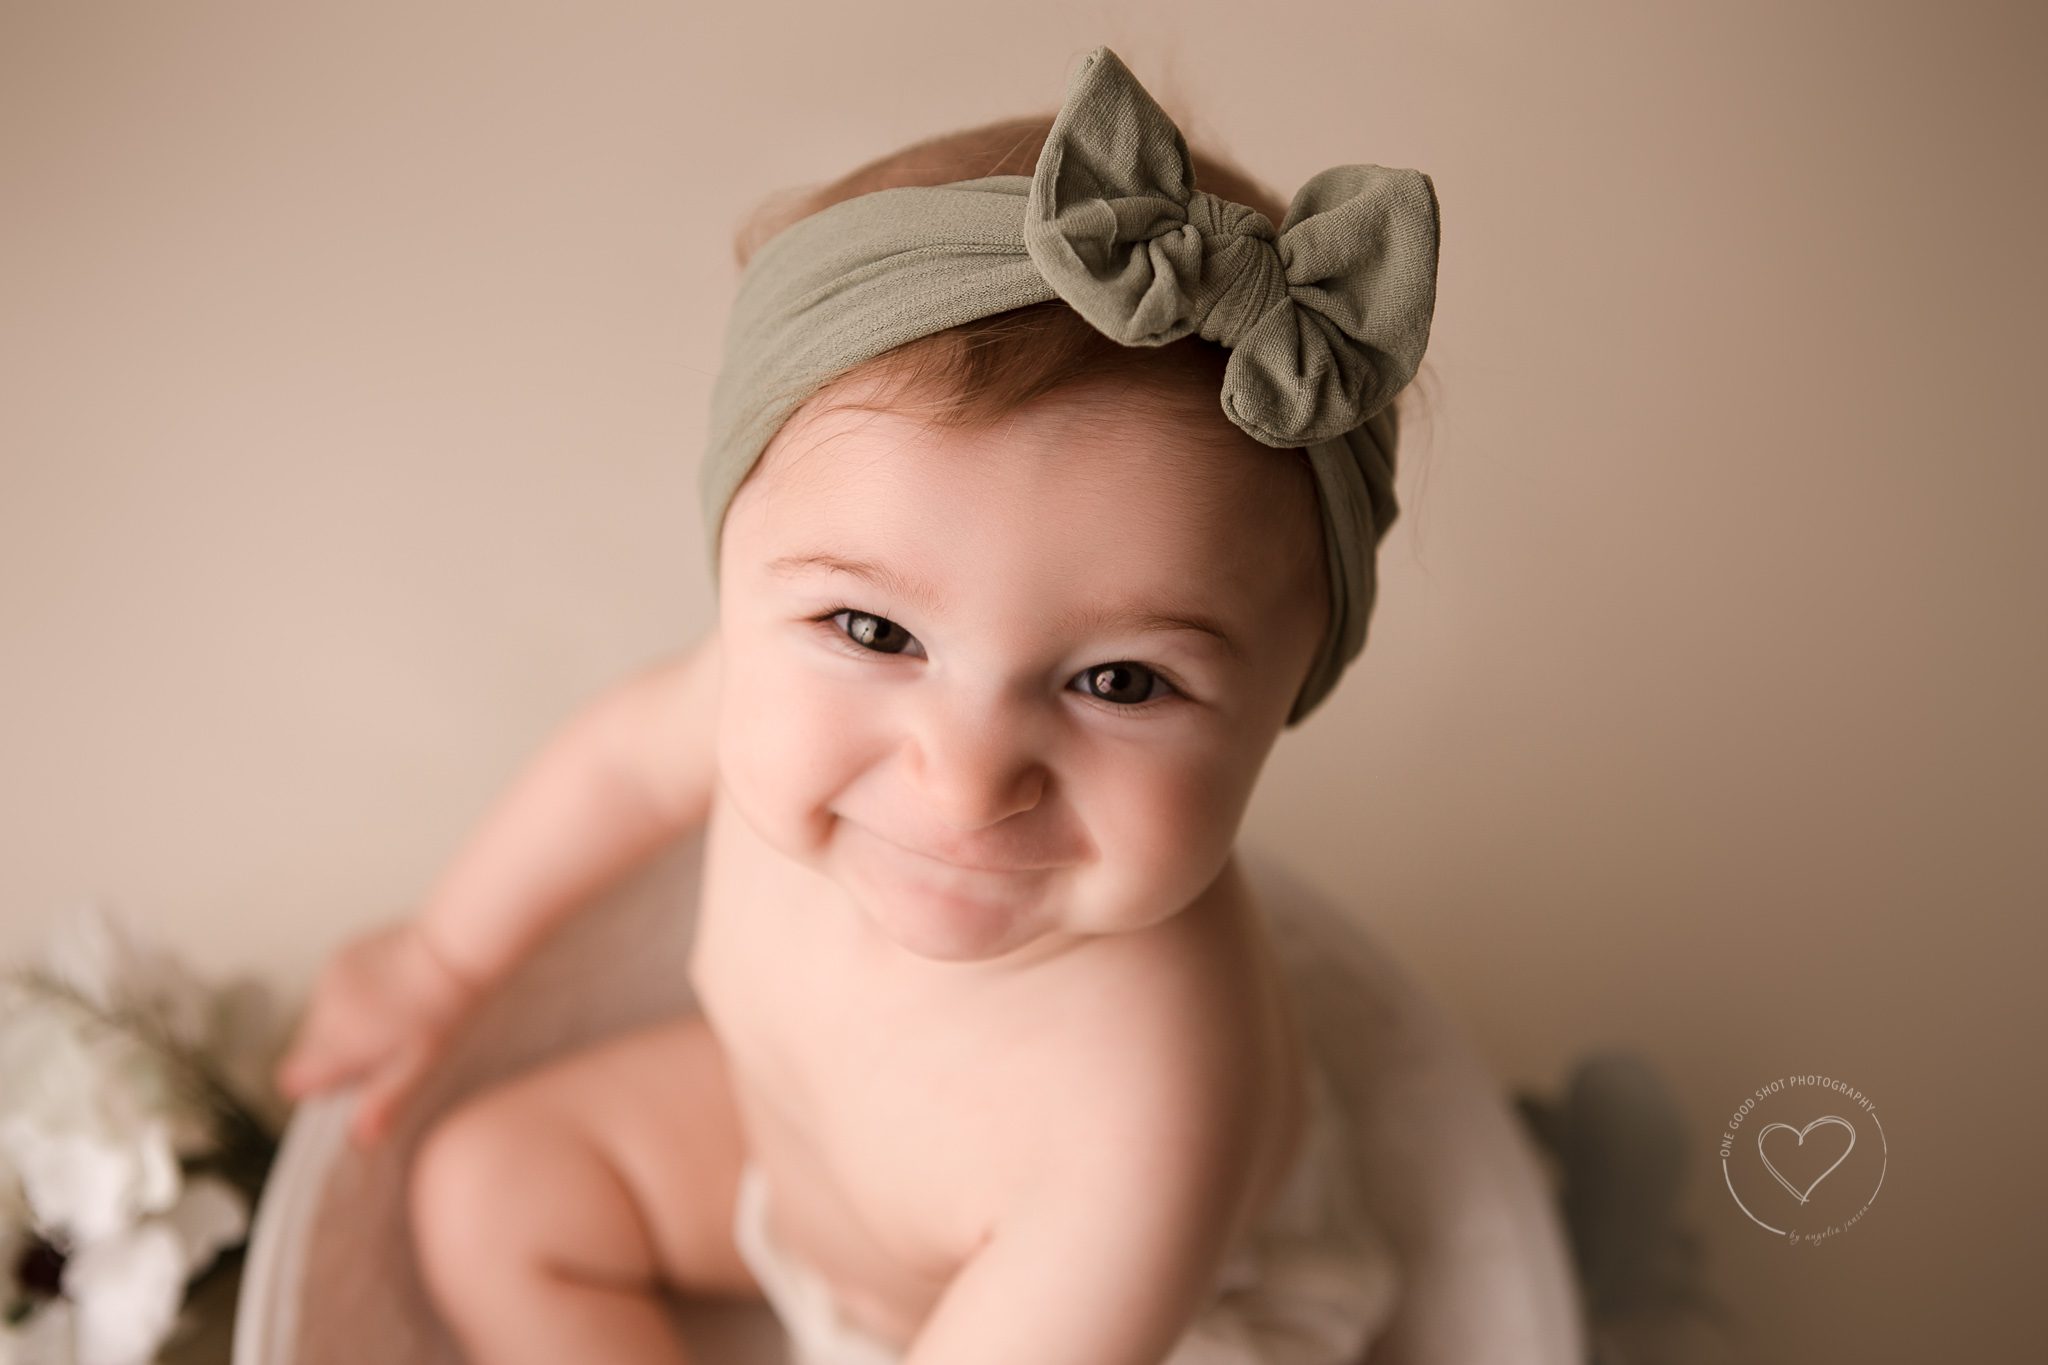 Baby girl, Sitting, 6 months old, smiling at camera, wearing green bow